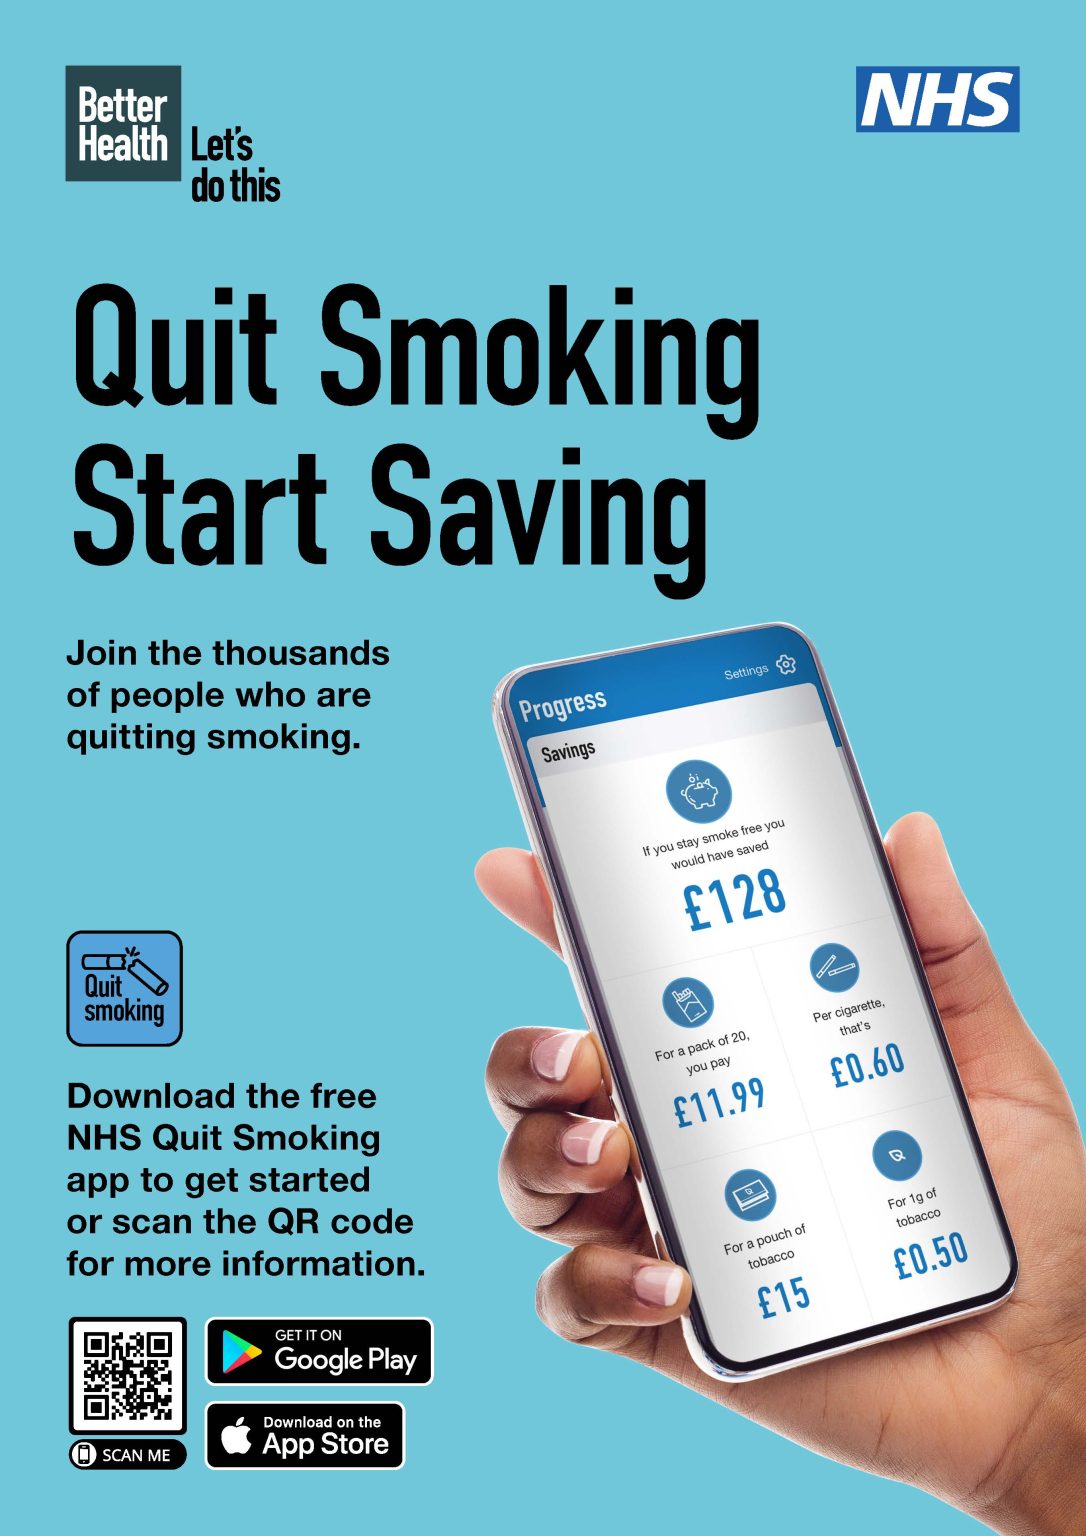 Smoking Cessation Campaign Harrogate and District NHS Foundation Trust